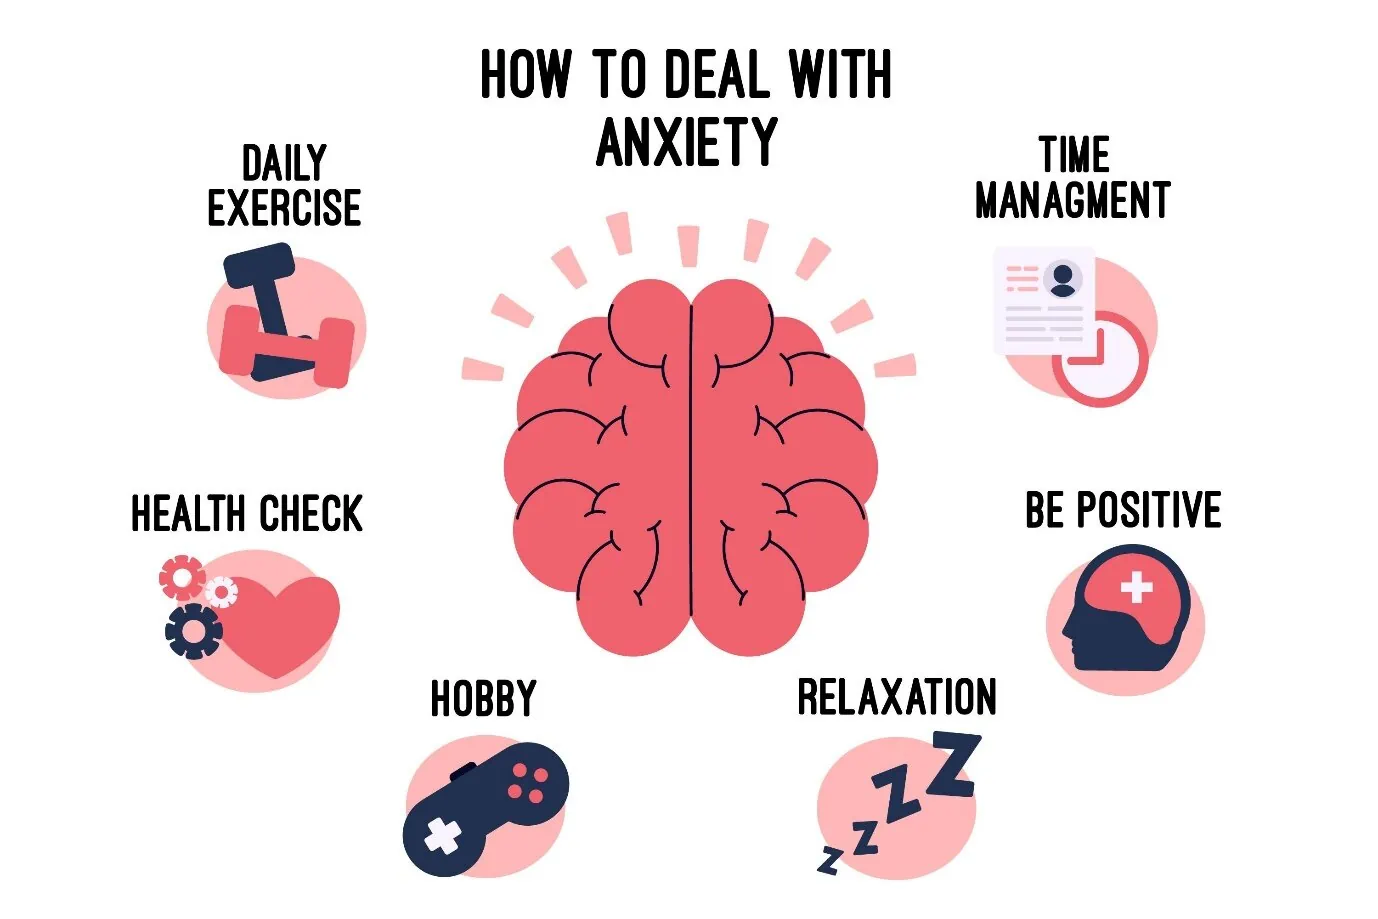 How Can You Deal With Anxiety?